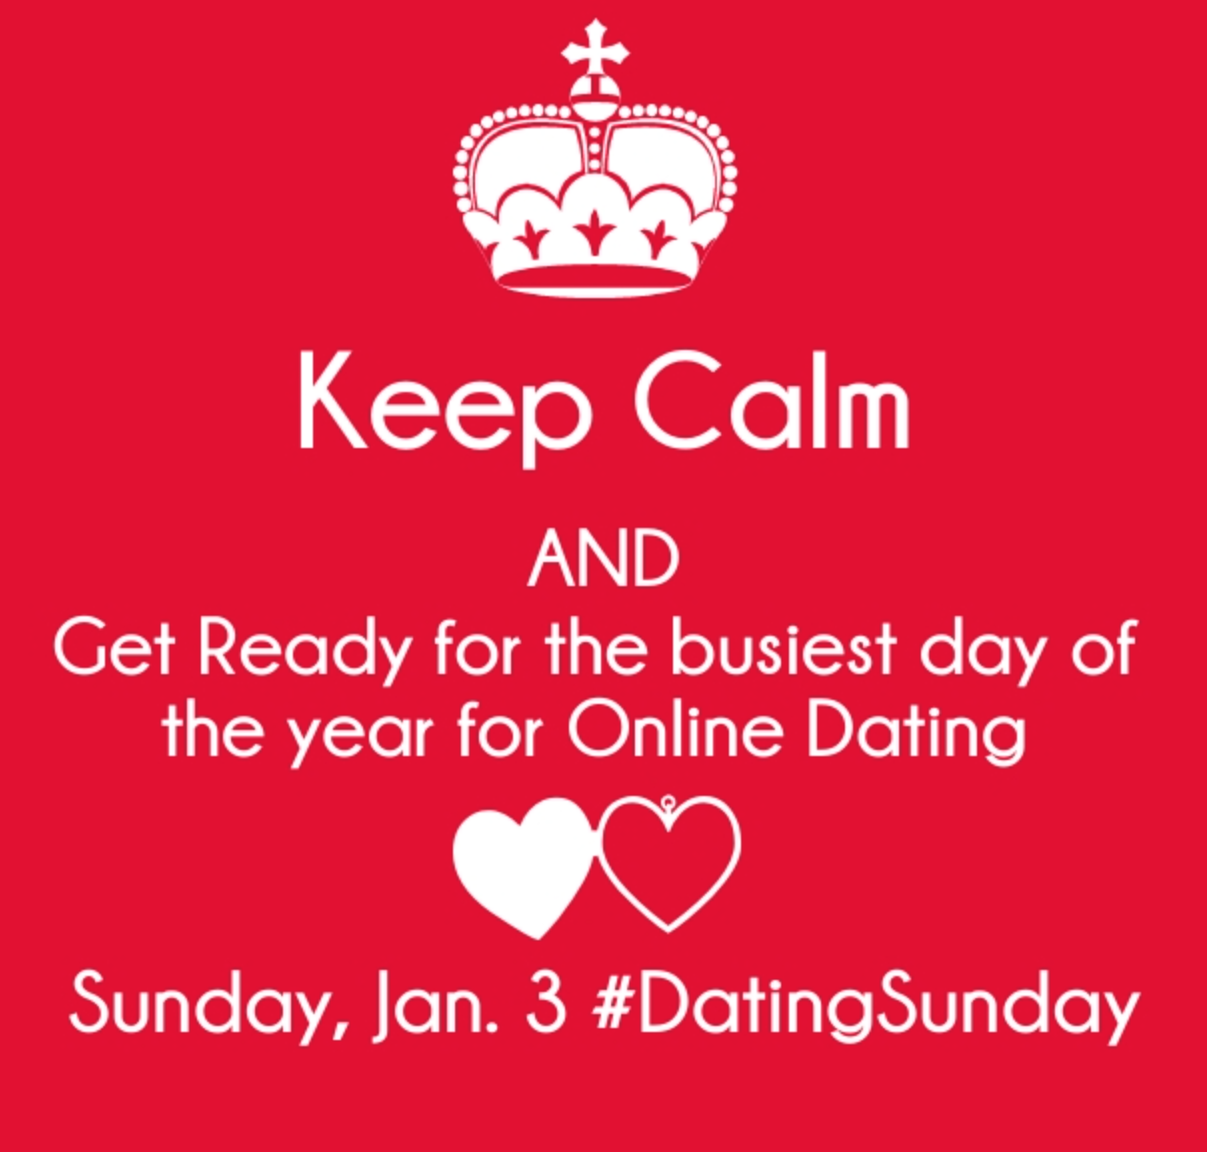 online dating busiest day